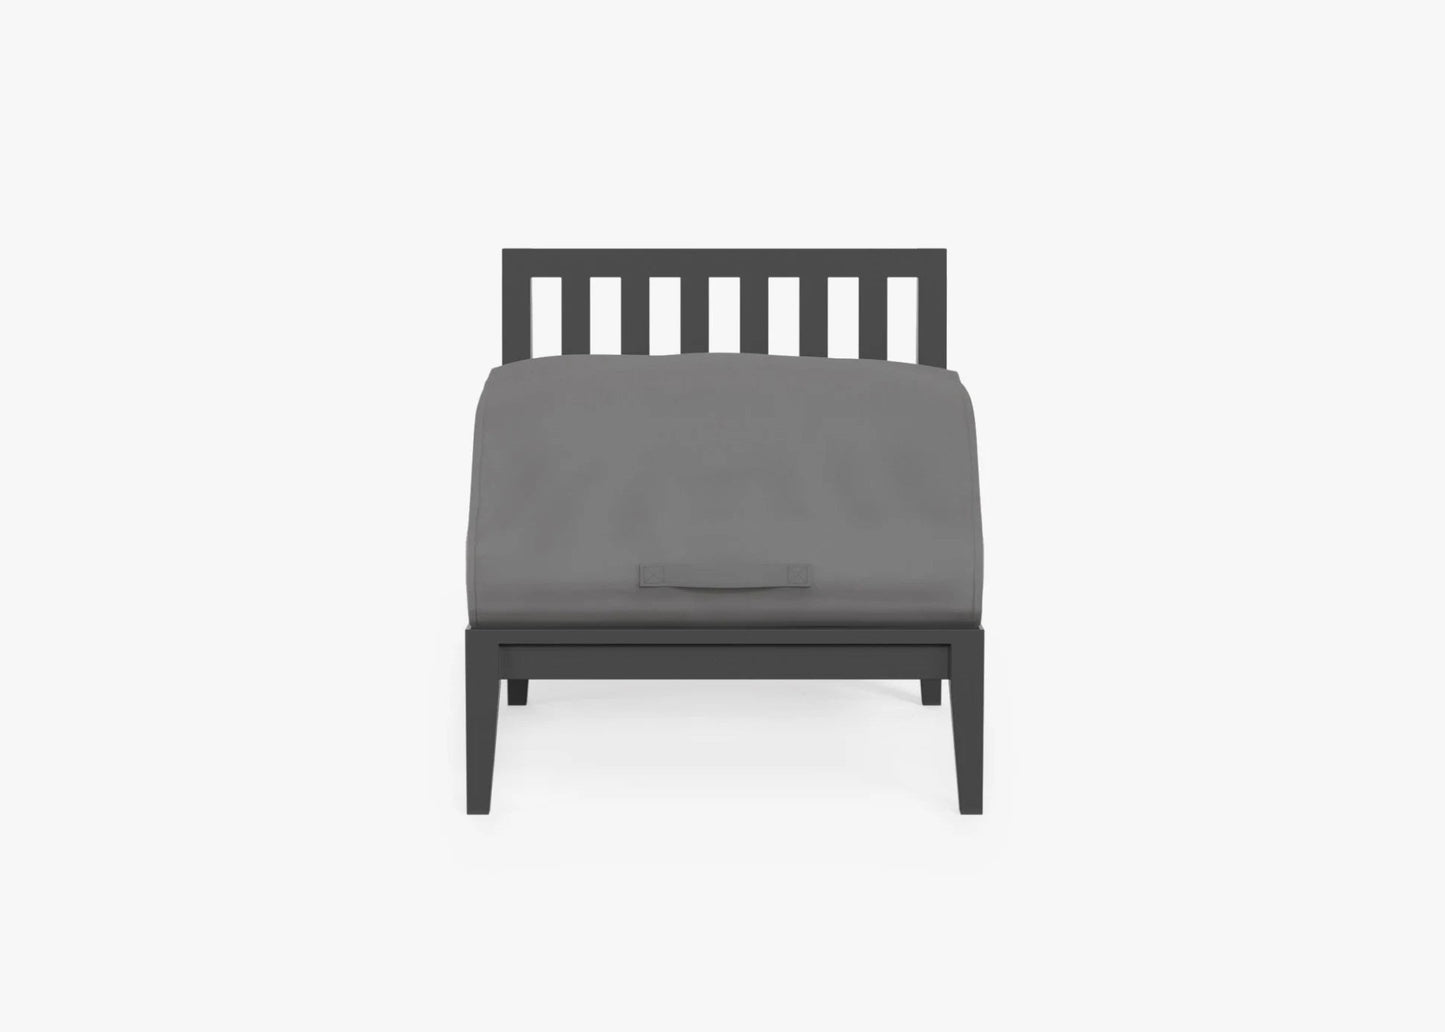 Live Outer 29" Charcoal Aluminum Outdoor Armless Chair With Sandstone Gray Cushion